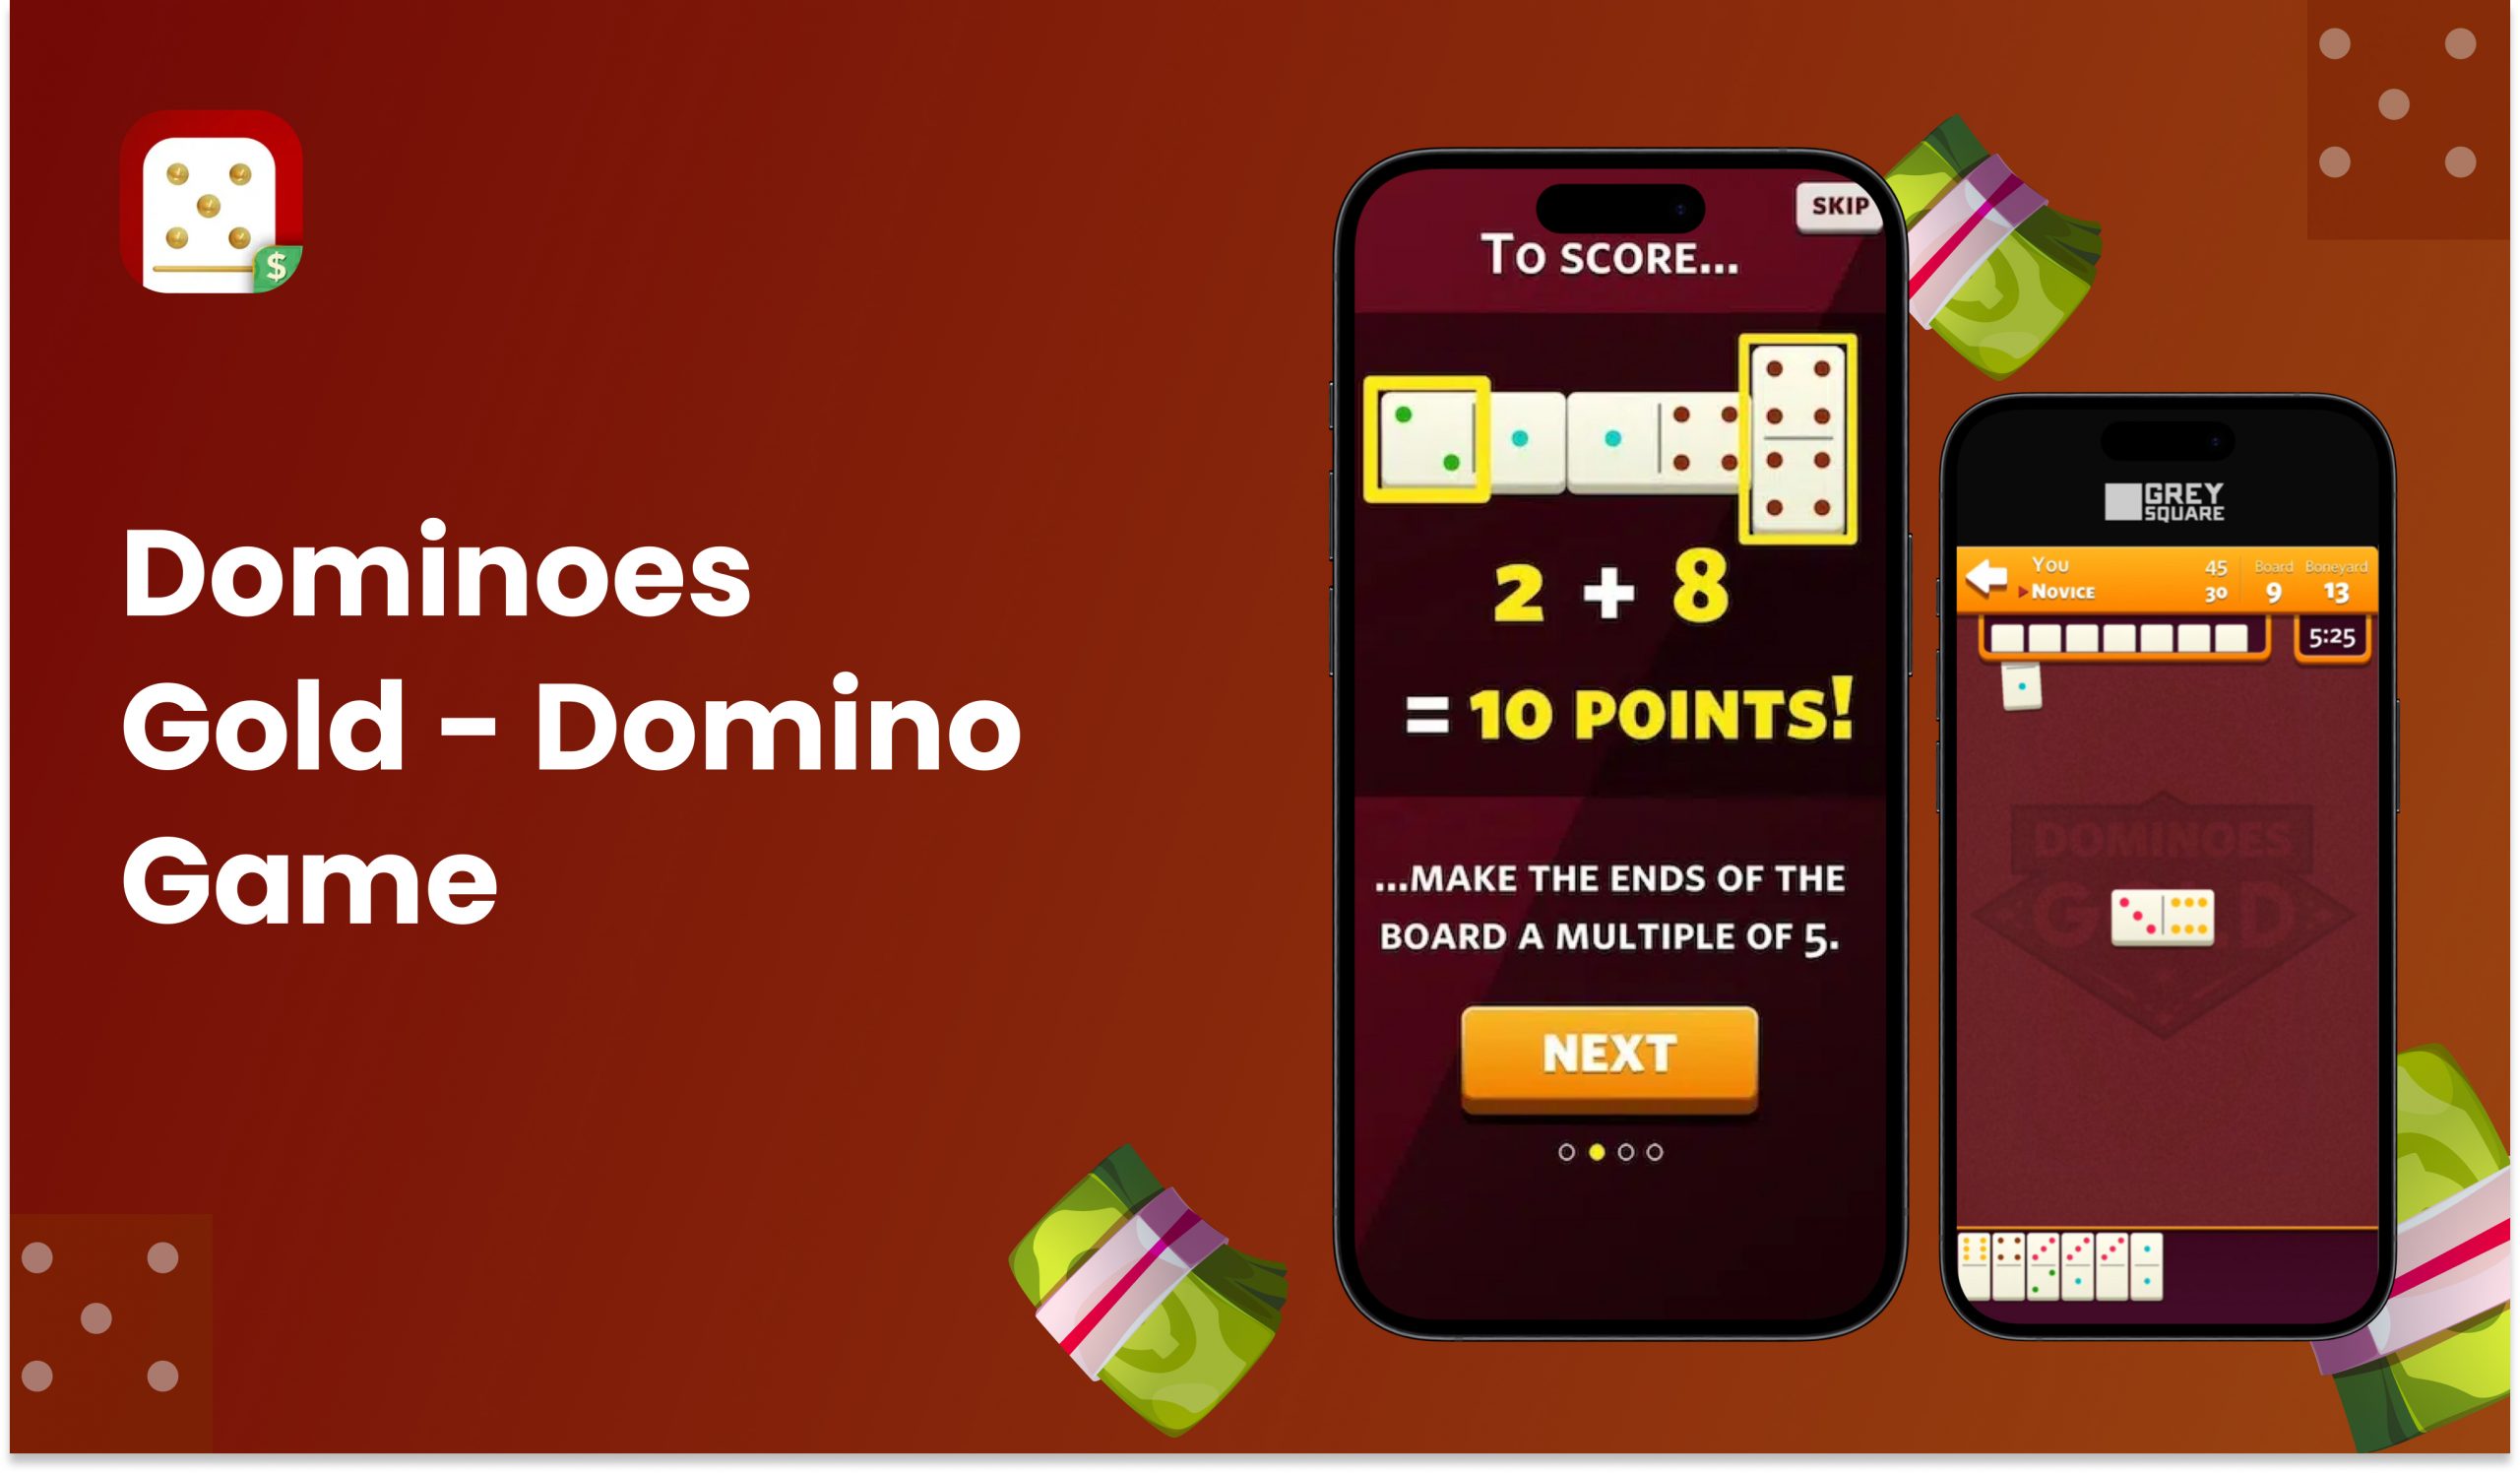 Dominoes Gold: Classic Game, Modern Rewards